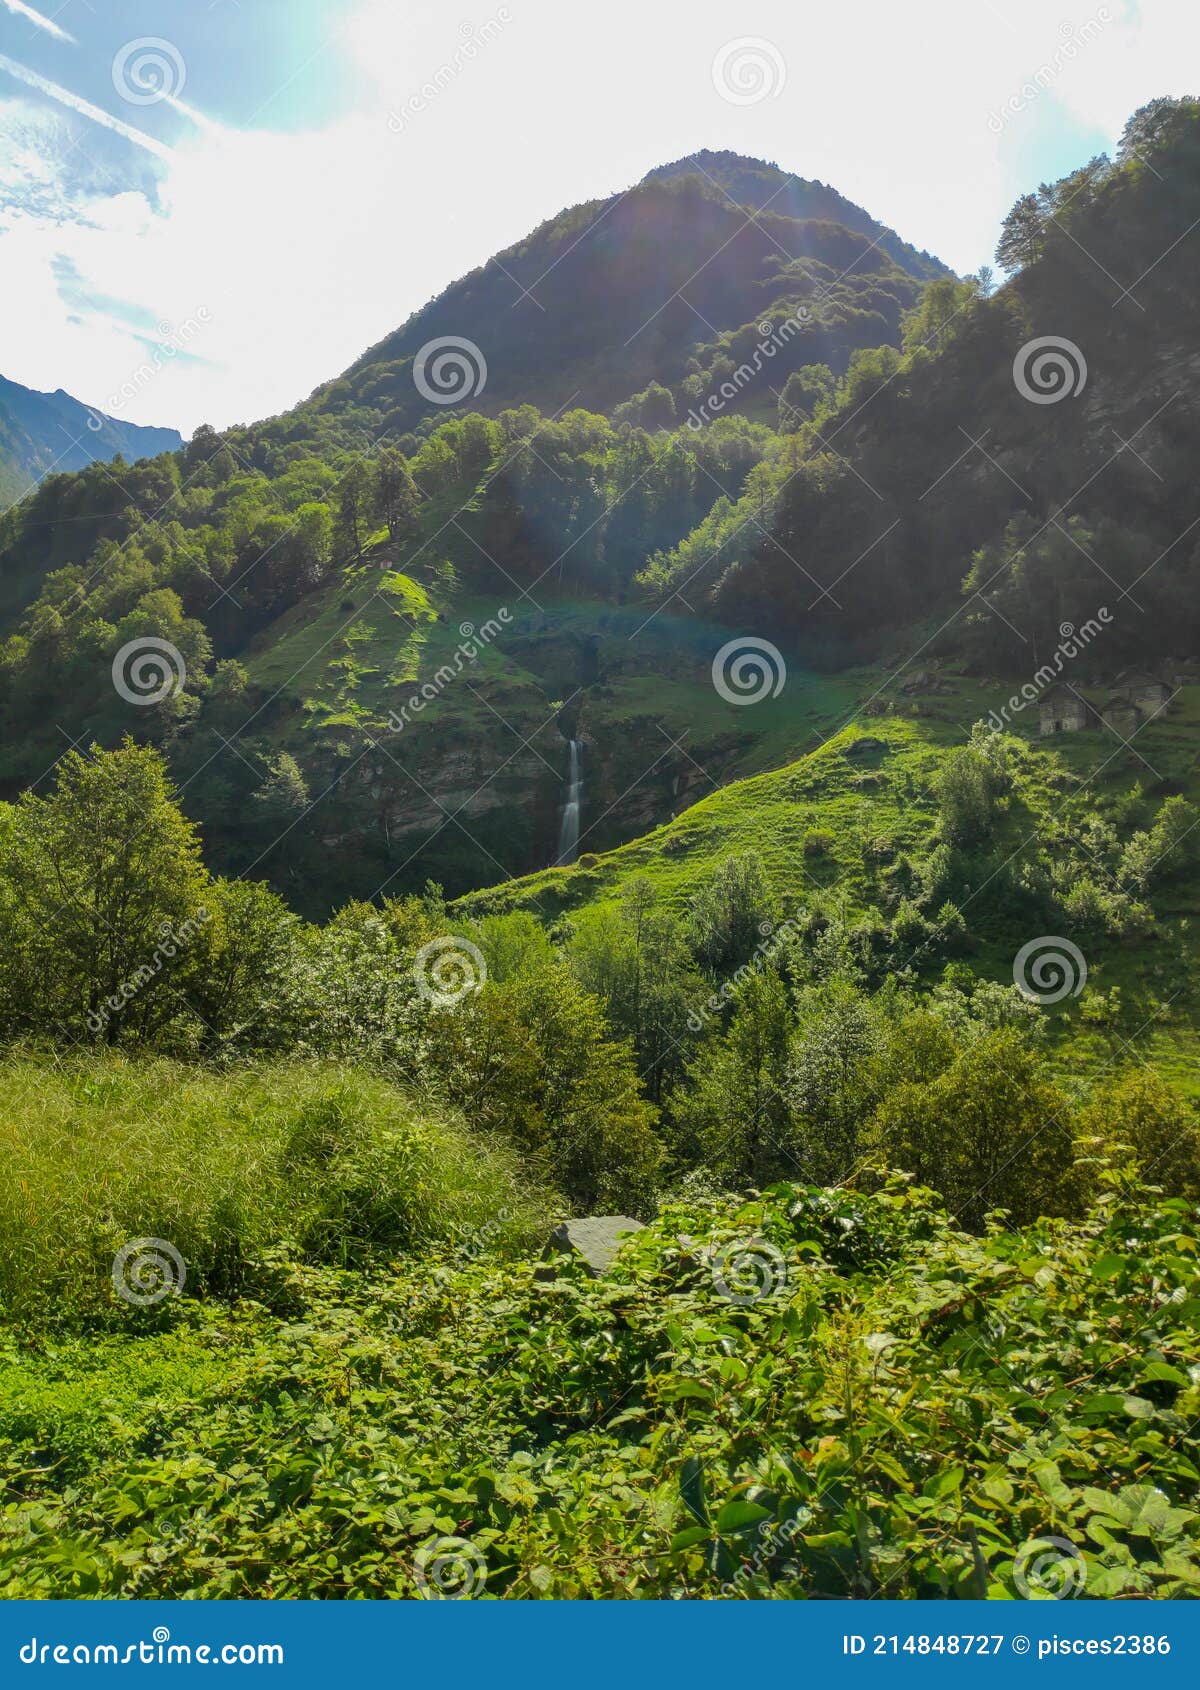 vertial image of landscape with waterfall in the val lavizzara